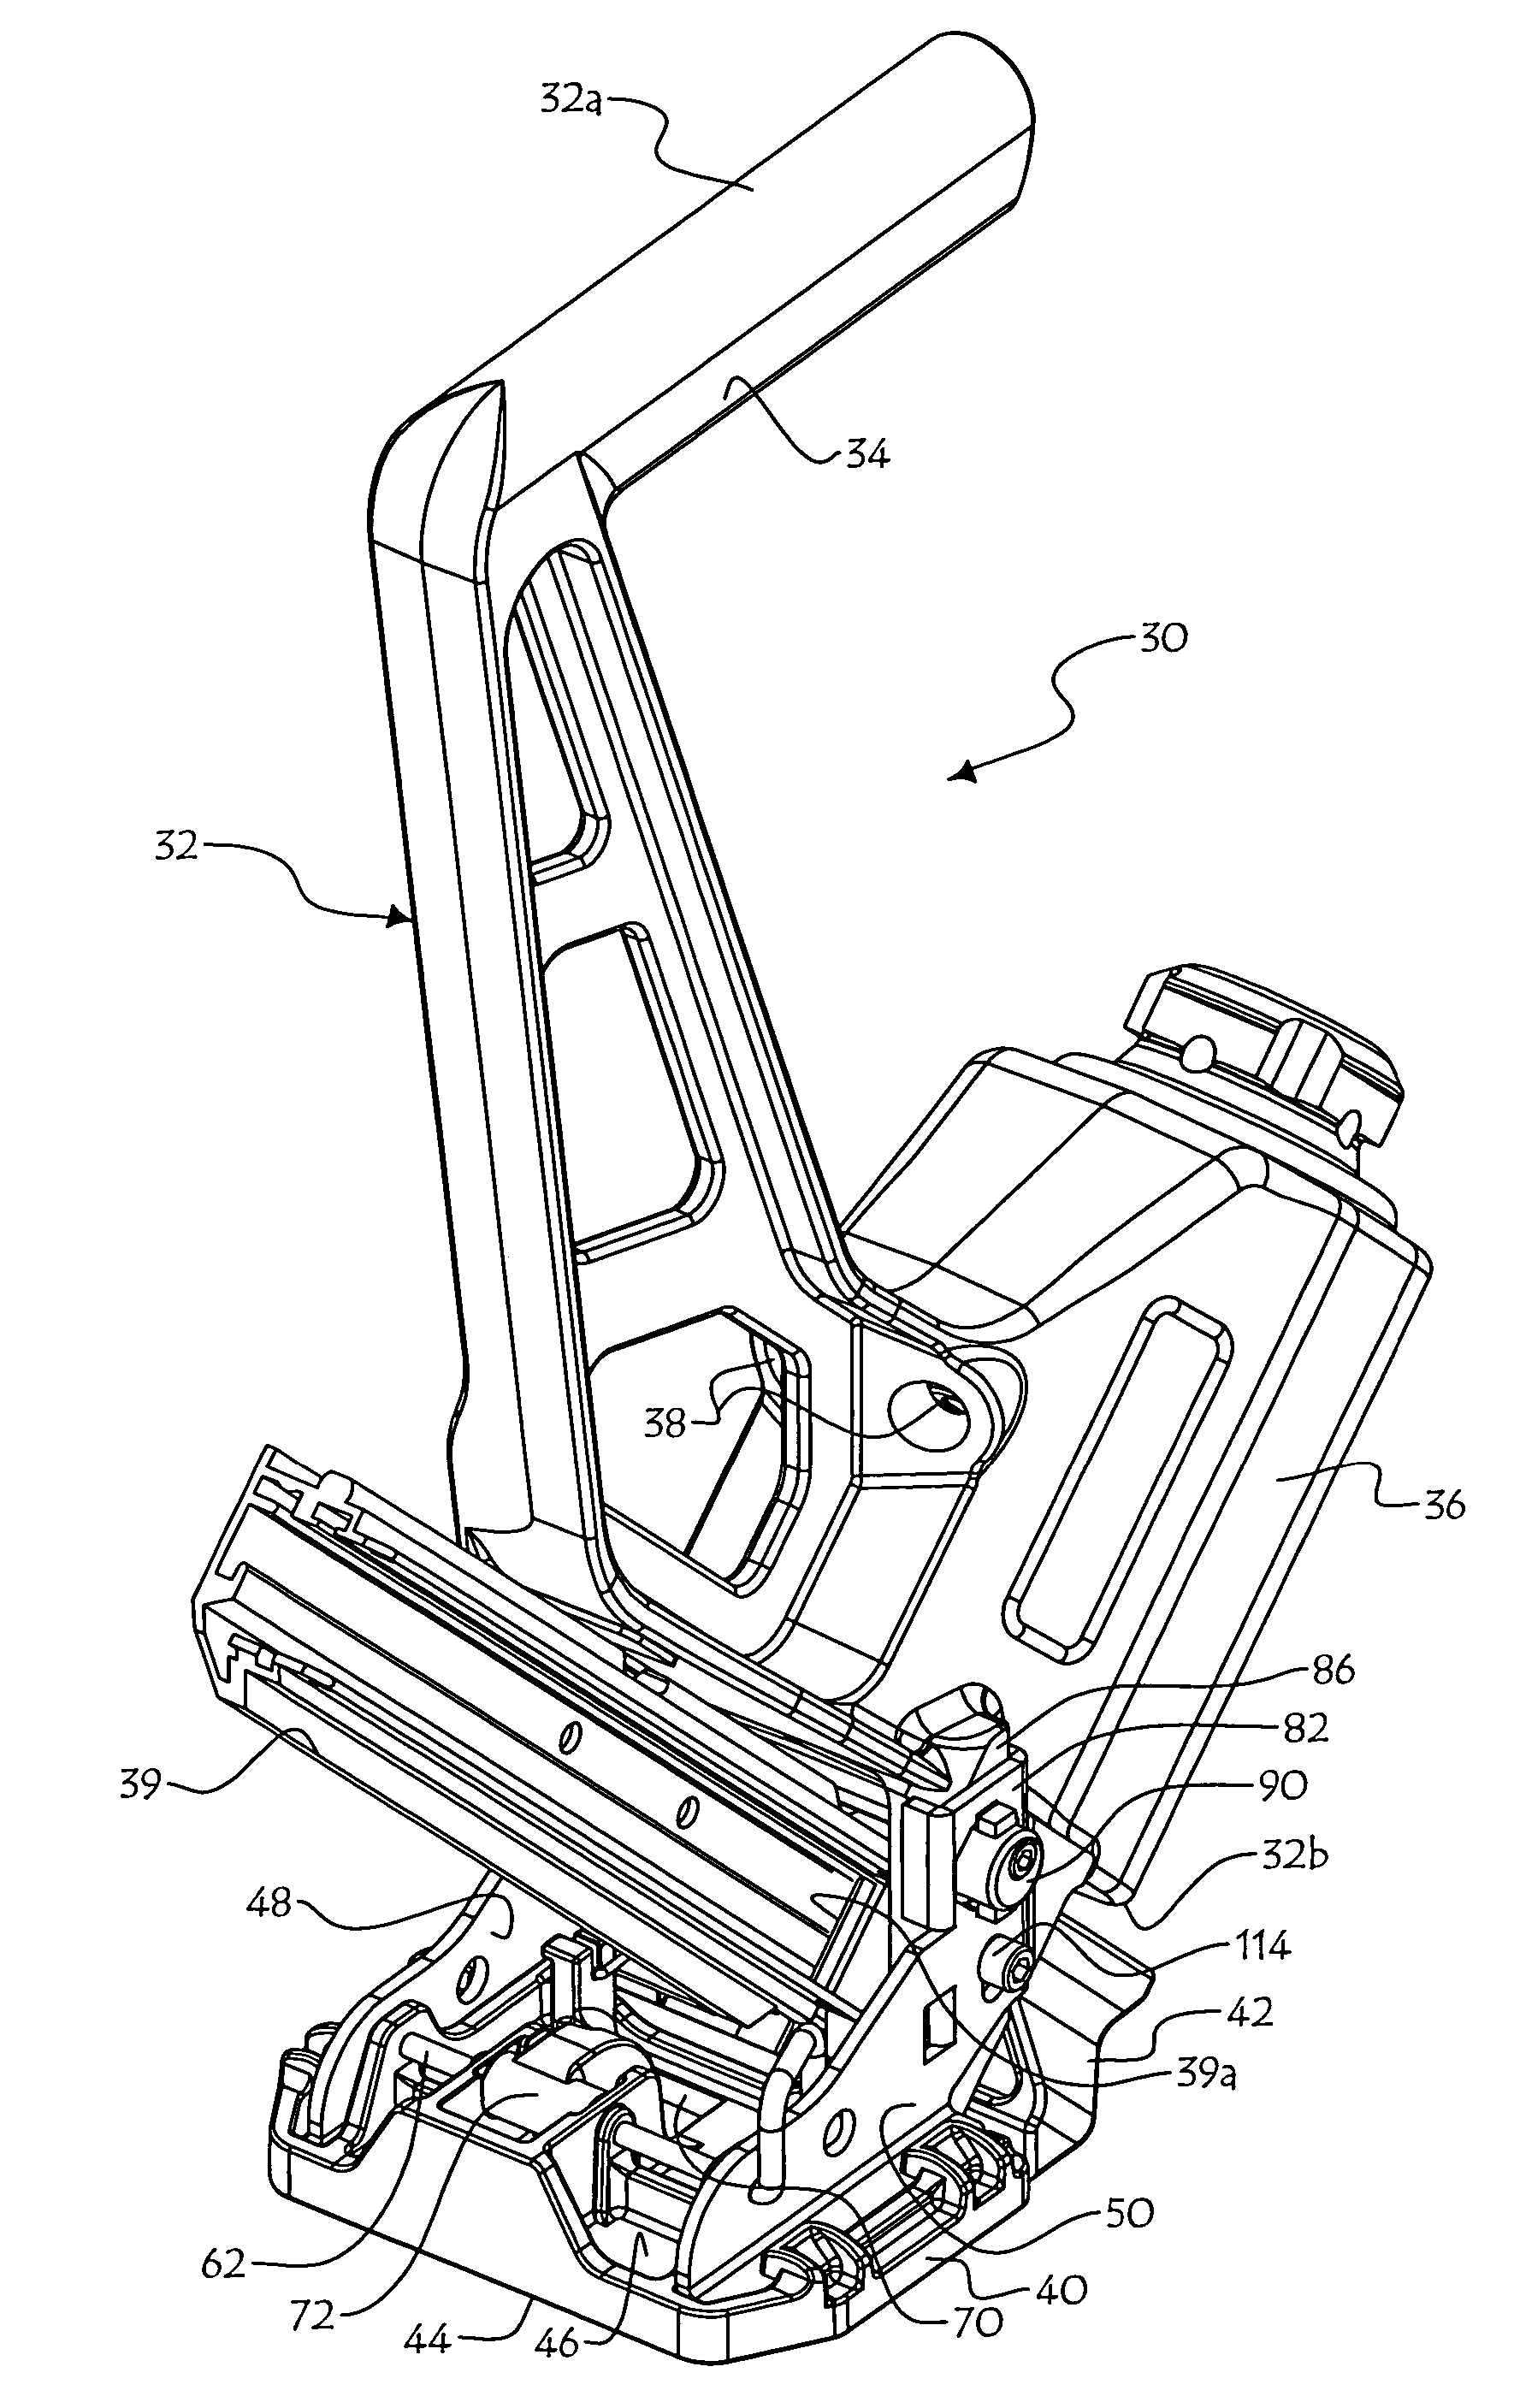 Nailer with adjustable guide member